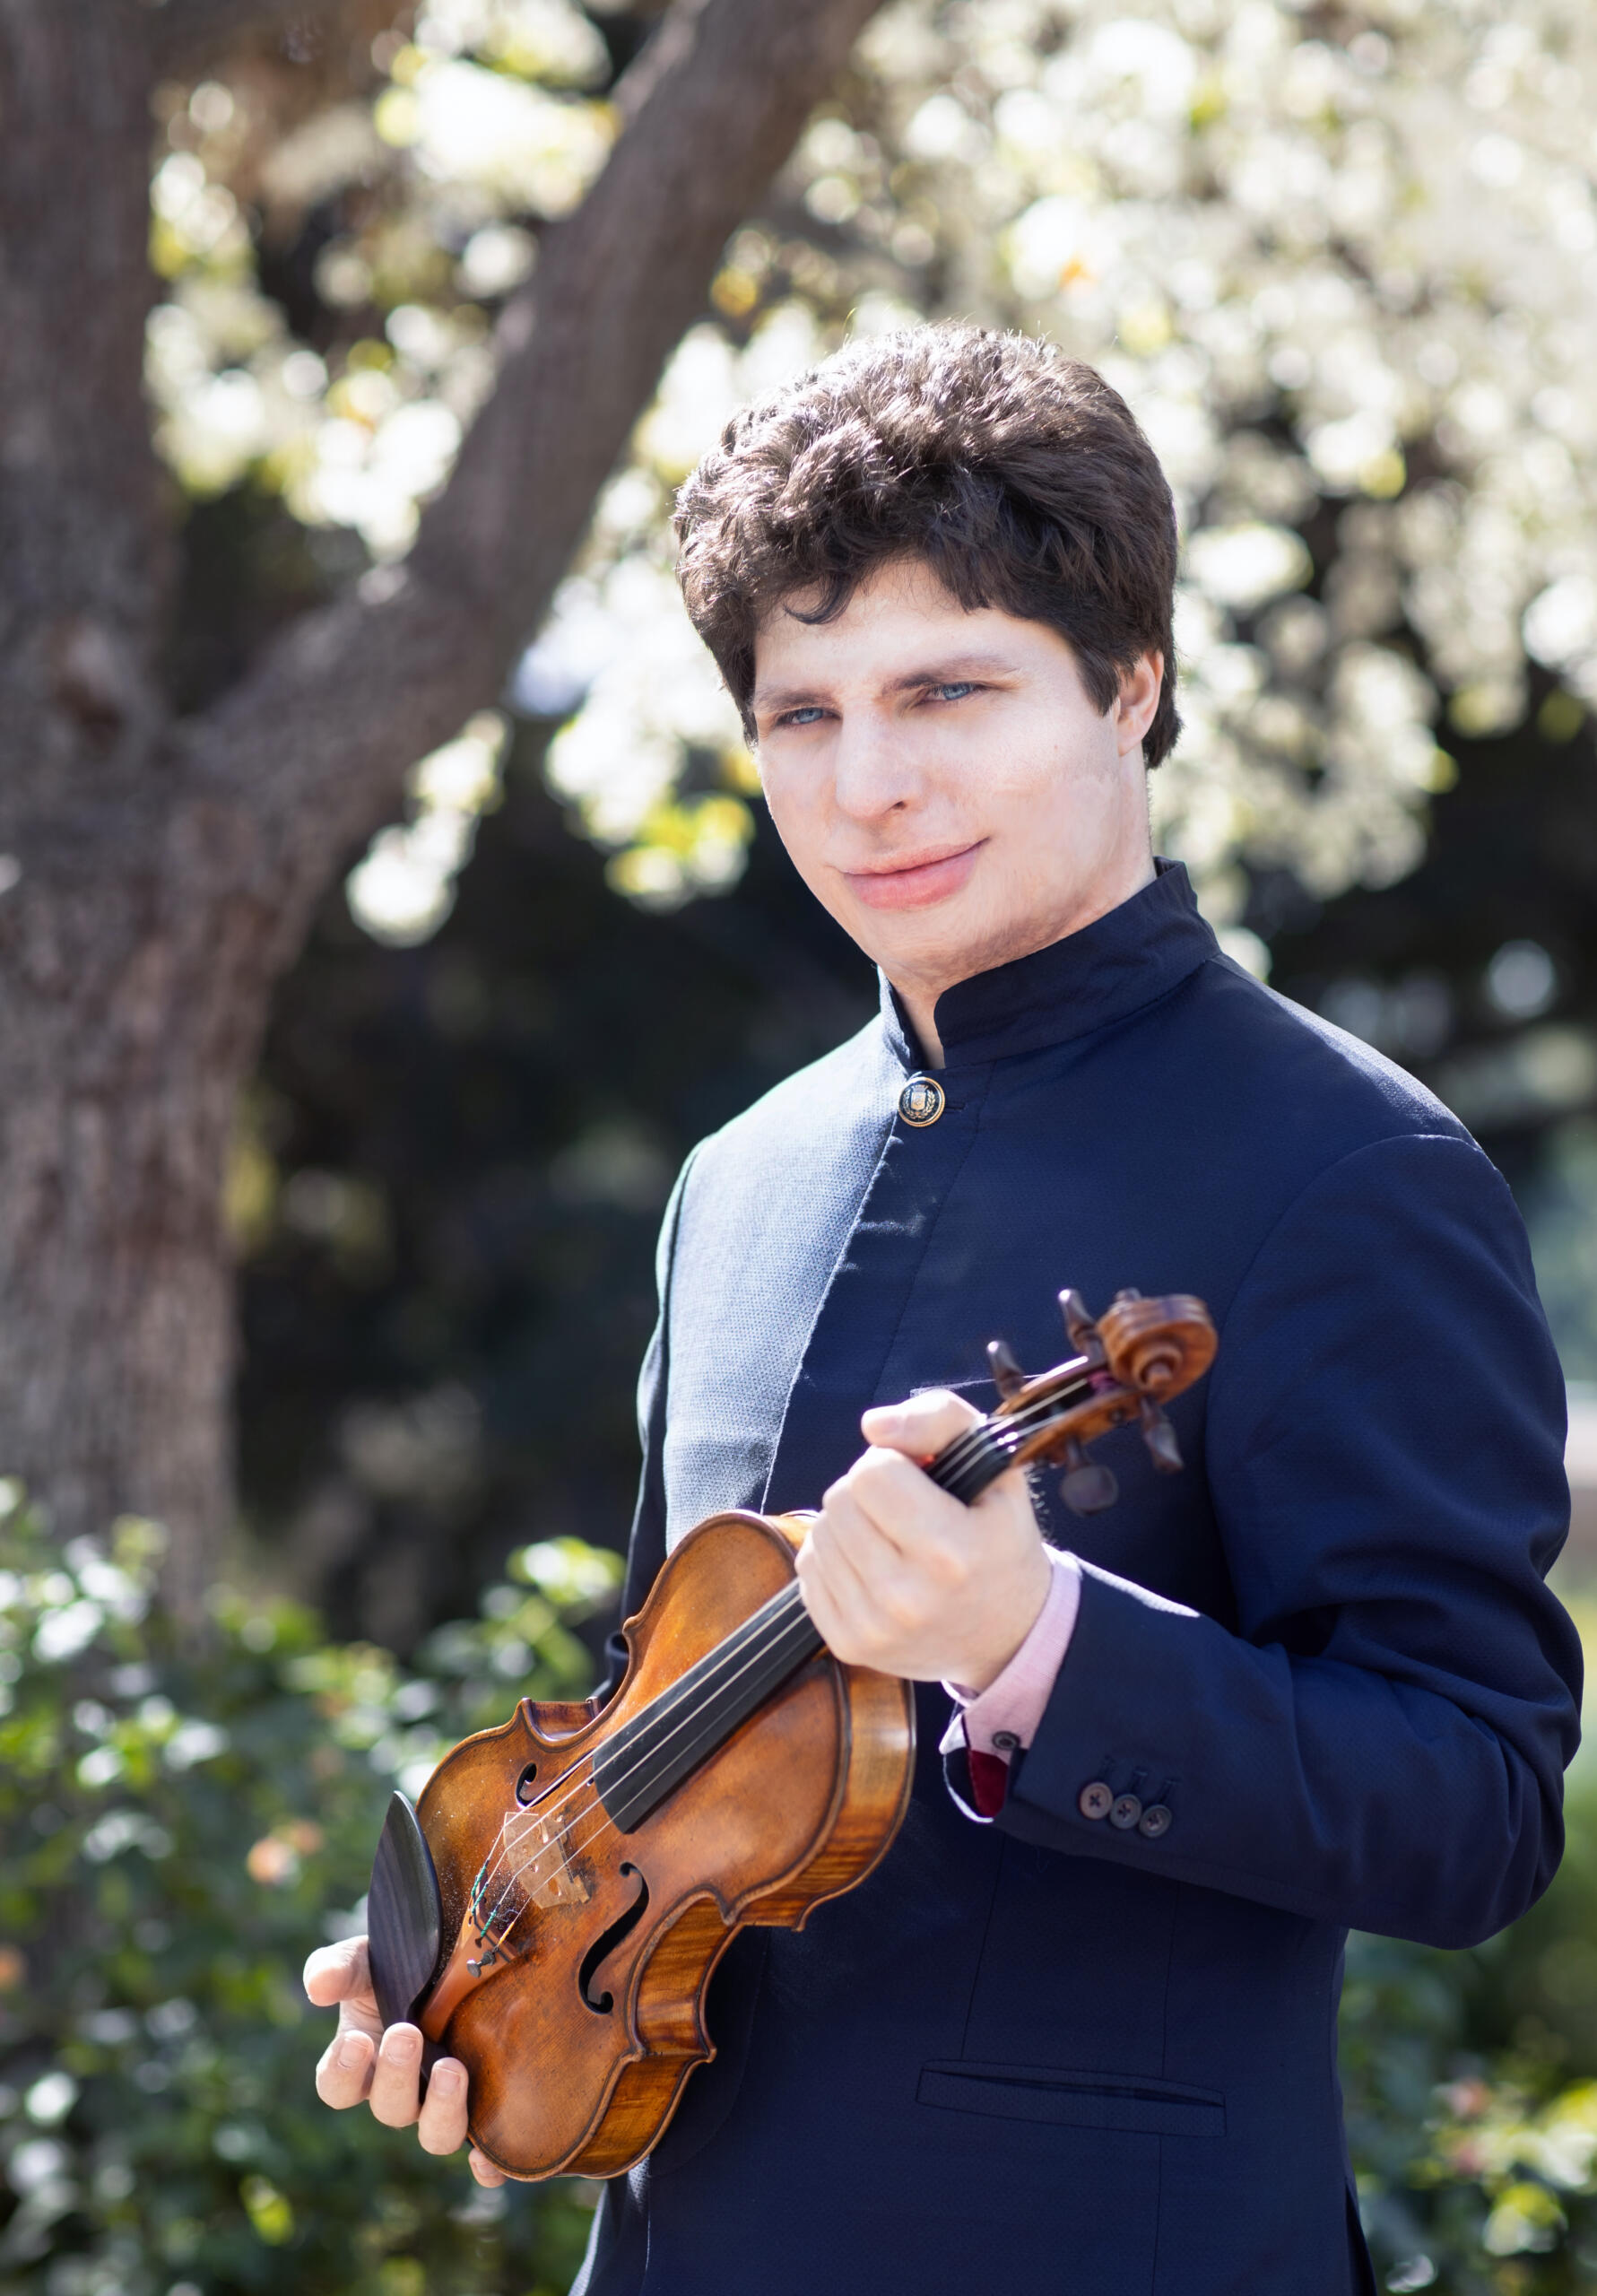 Portrait of the violinist Augustin Hadelich. He is wearing a blue suit jacket and is standing in a garden with his violin.